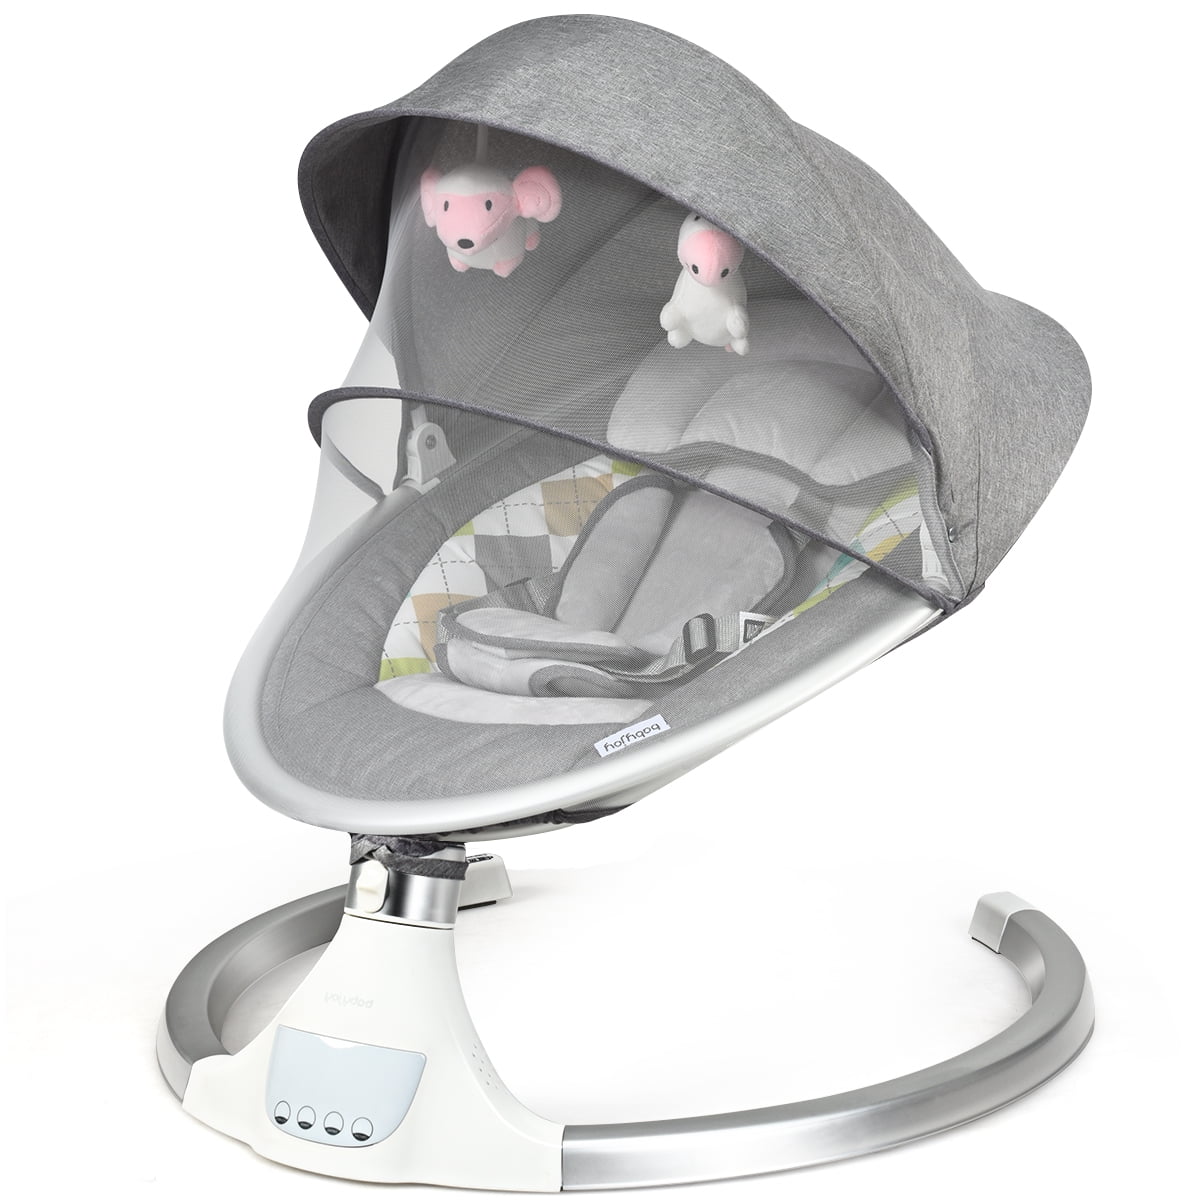 Topbuy Electric Baby Rocking Chair Swing With Mosquito Nets 2 Toys Gray Walmart Com Walmart Com